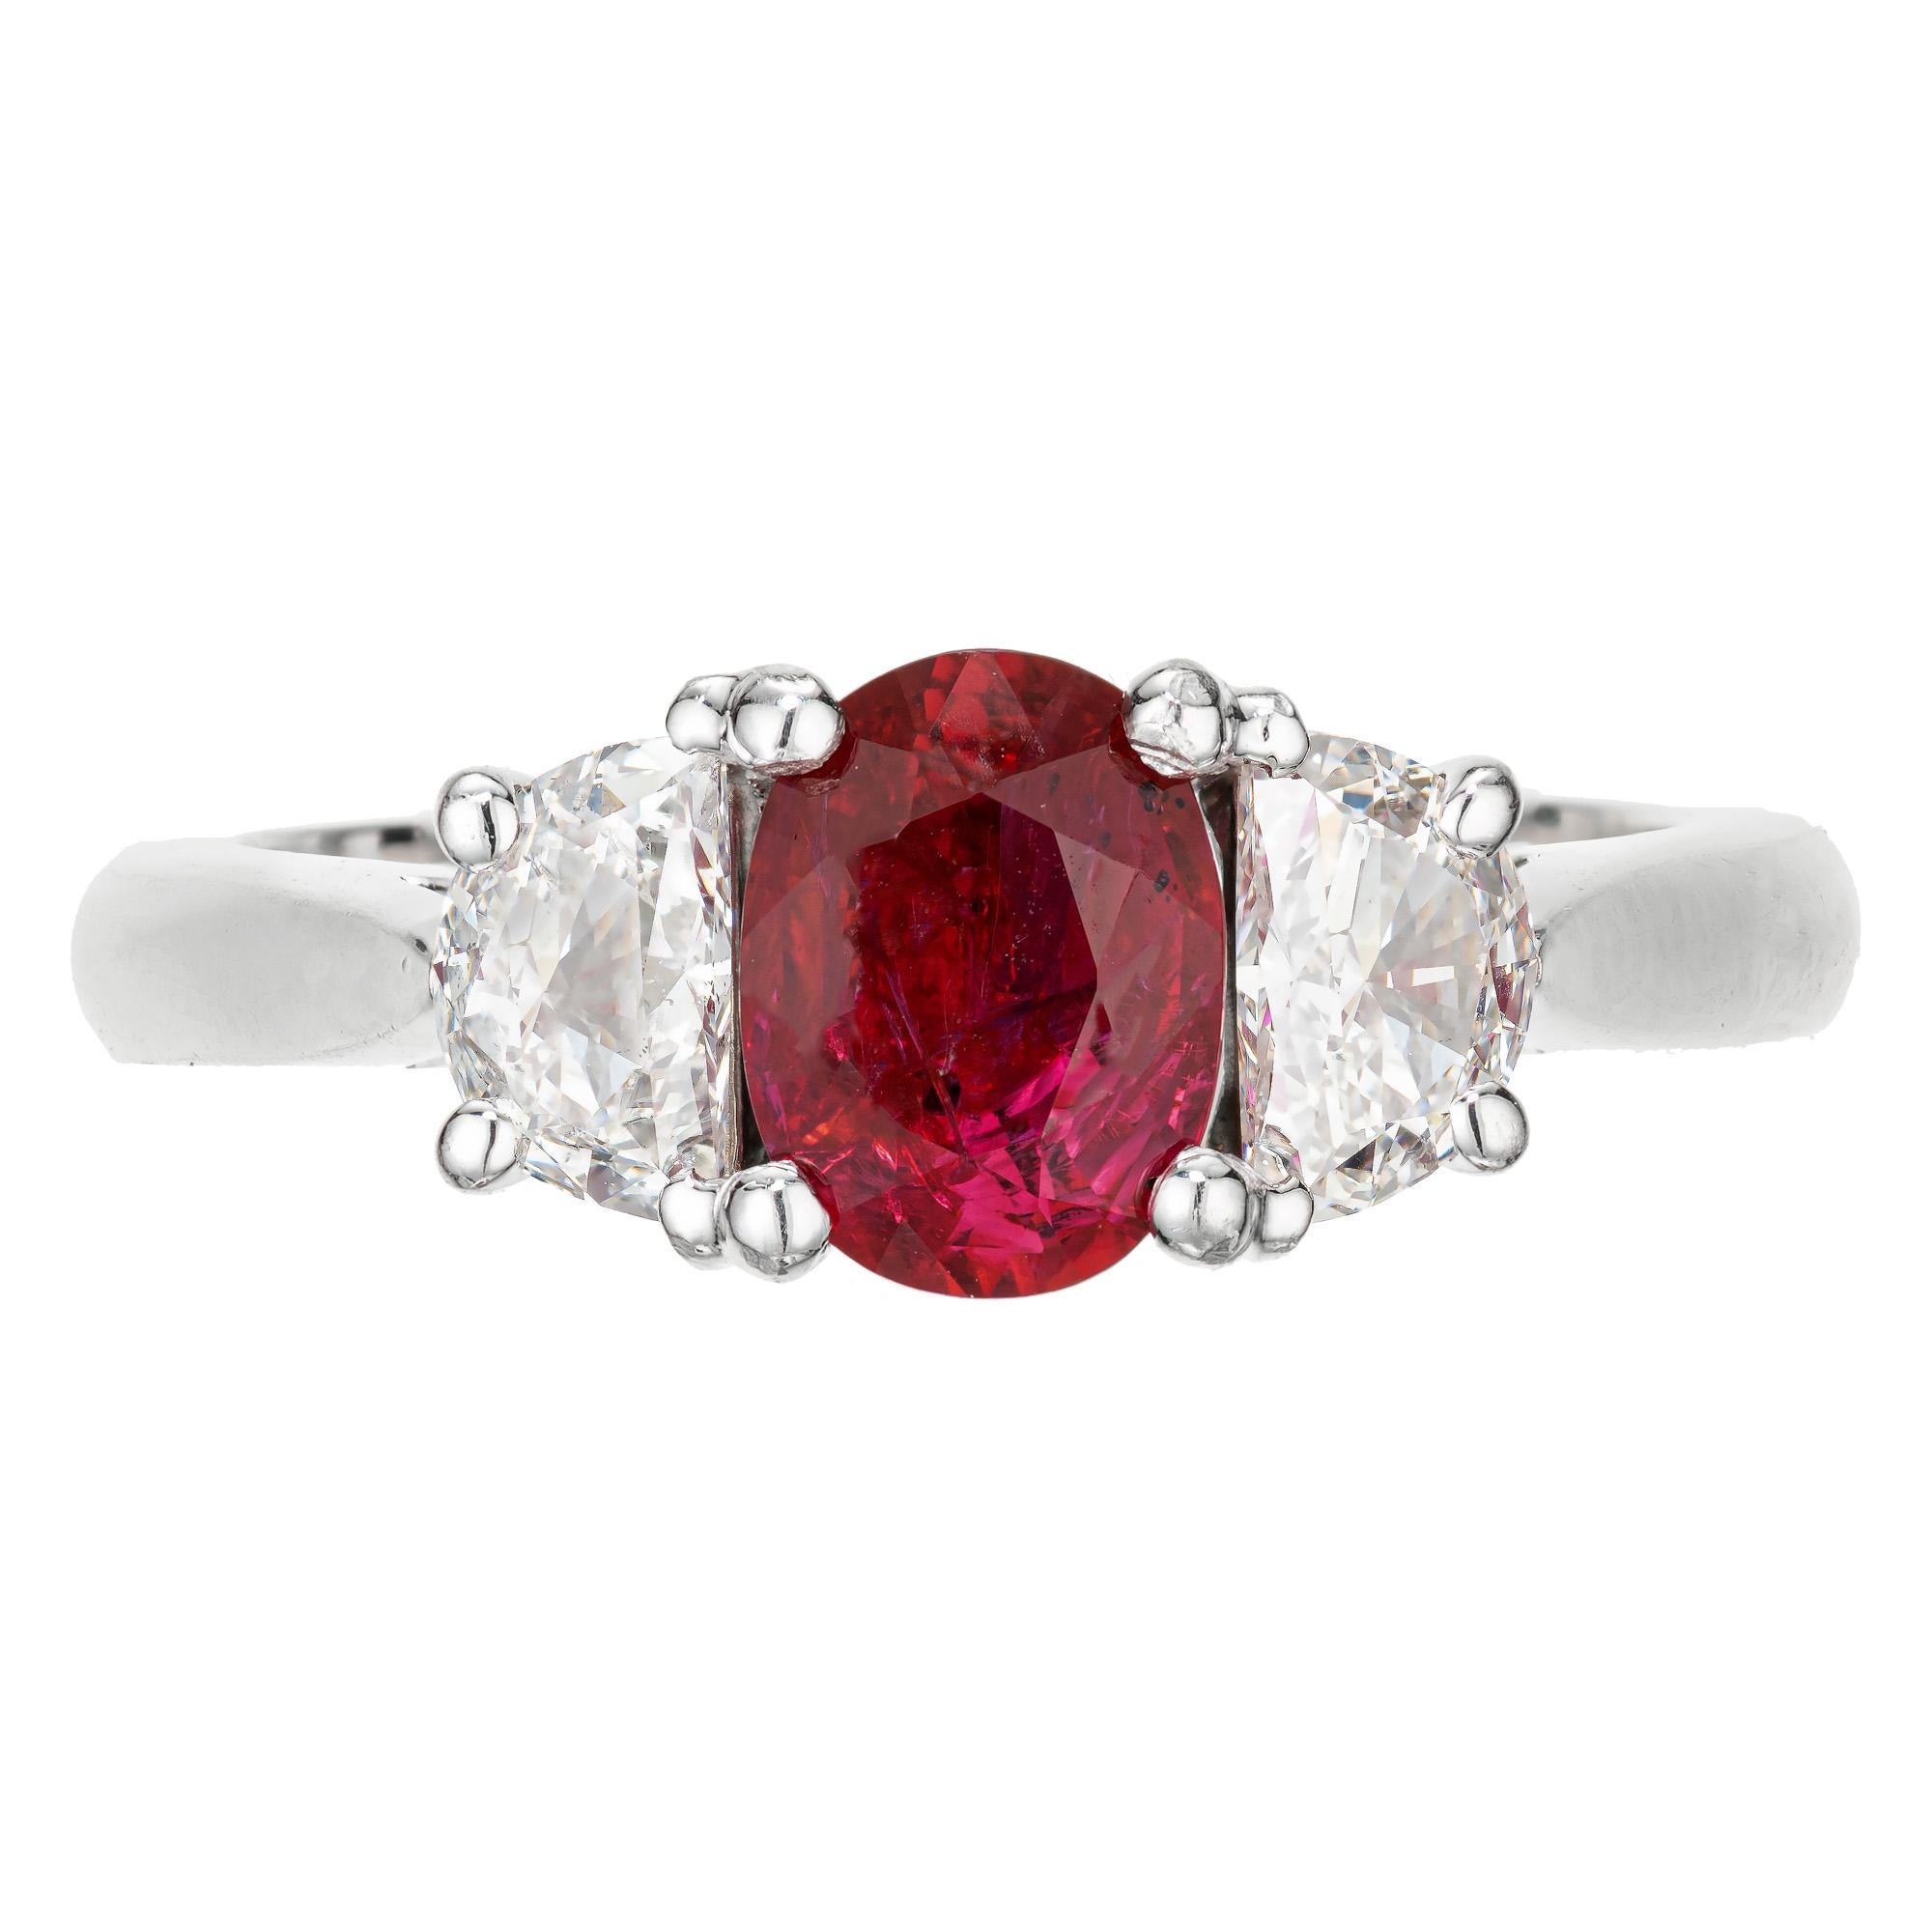 Three stone platinum engagement ring. GIA certified 1.51cts Oval natural no heat ruby center stone in a handmade platinum basket setting with two half moon accent diamonds. Created in Peter Suchy Workshop.

1 oval red Ruby, approx. total weight